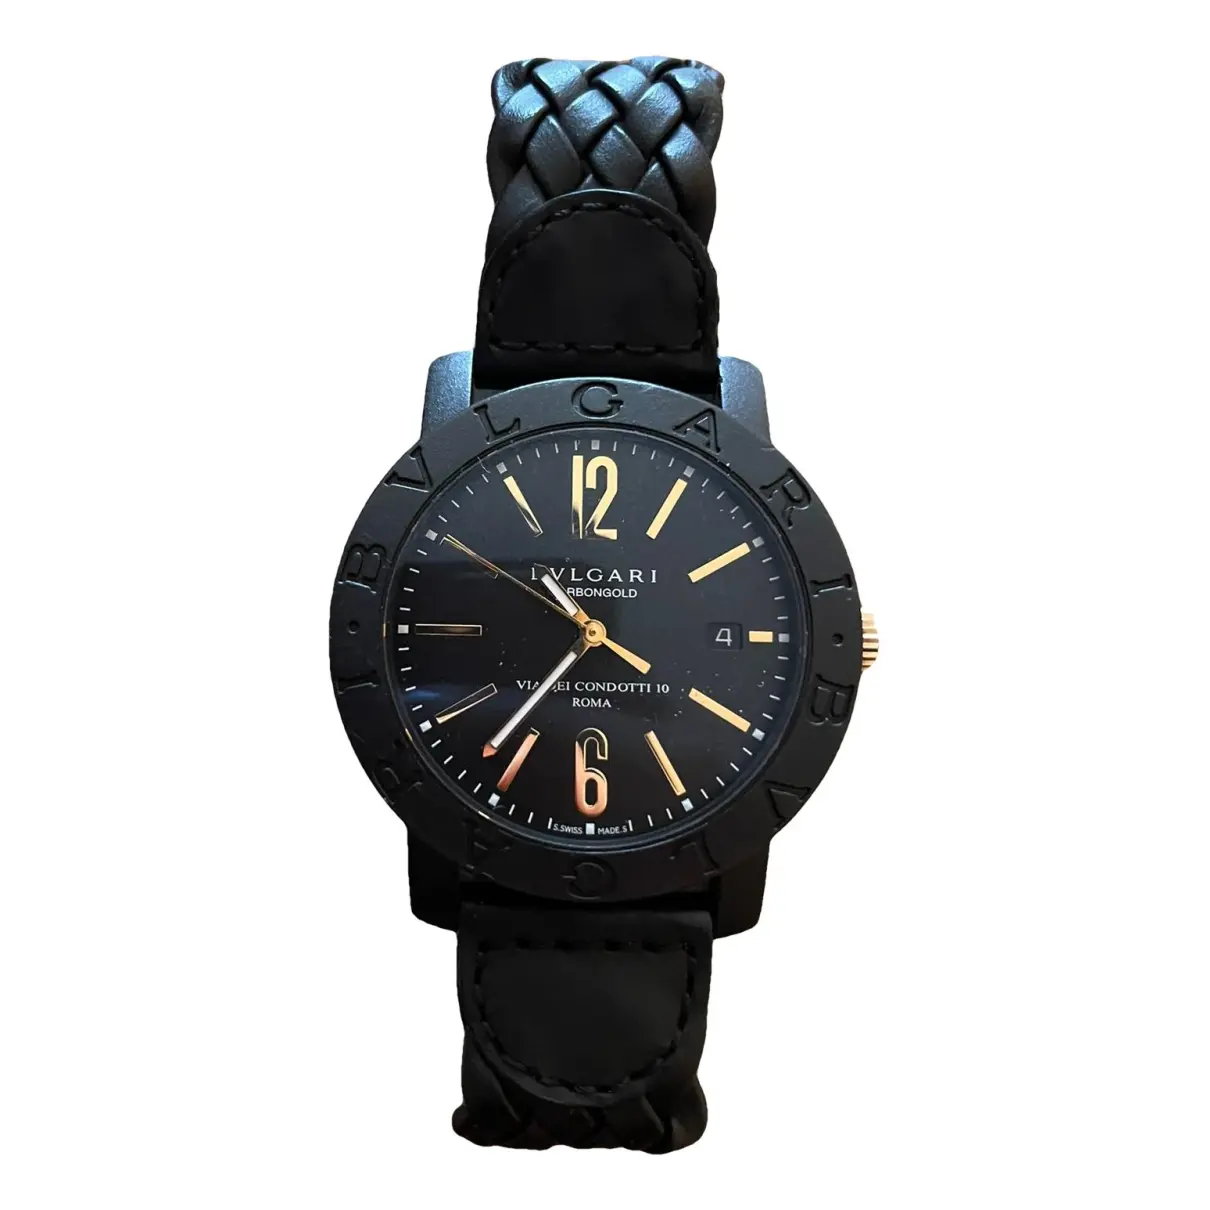 Carbon Gold watch